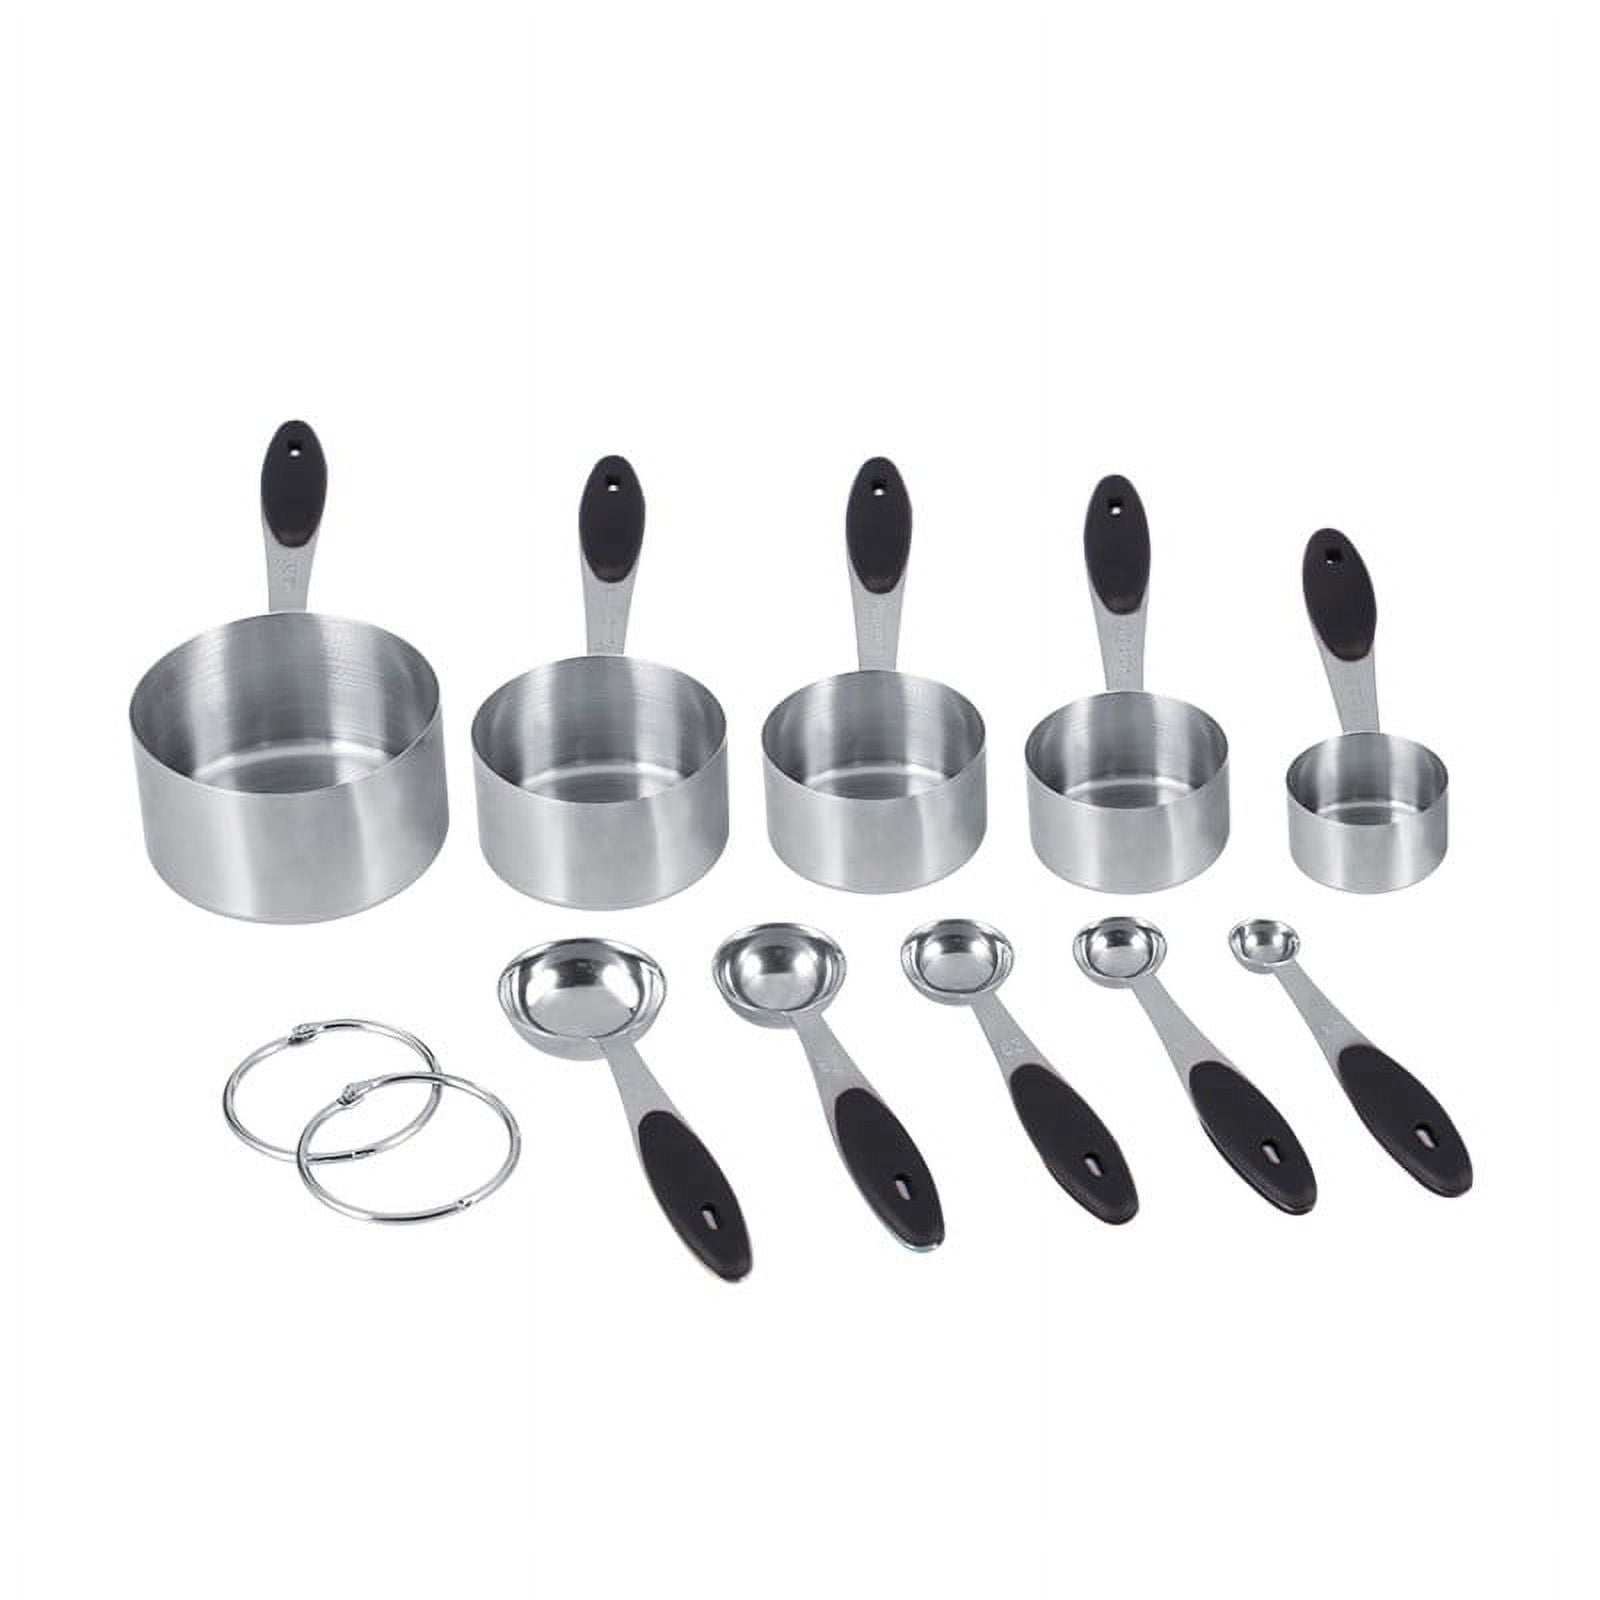  U-Taste 10 Piece Measuring Cups and Spoons Set in 18/8 Stainless  Steel: Home & Kitchen